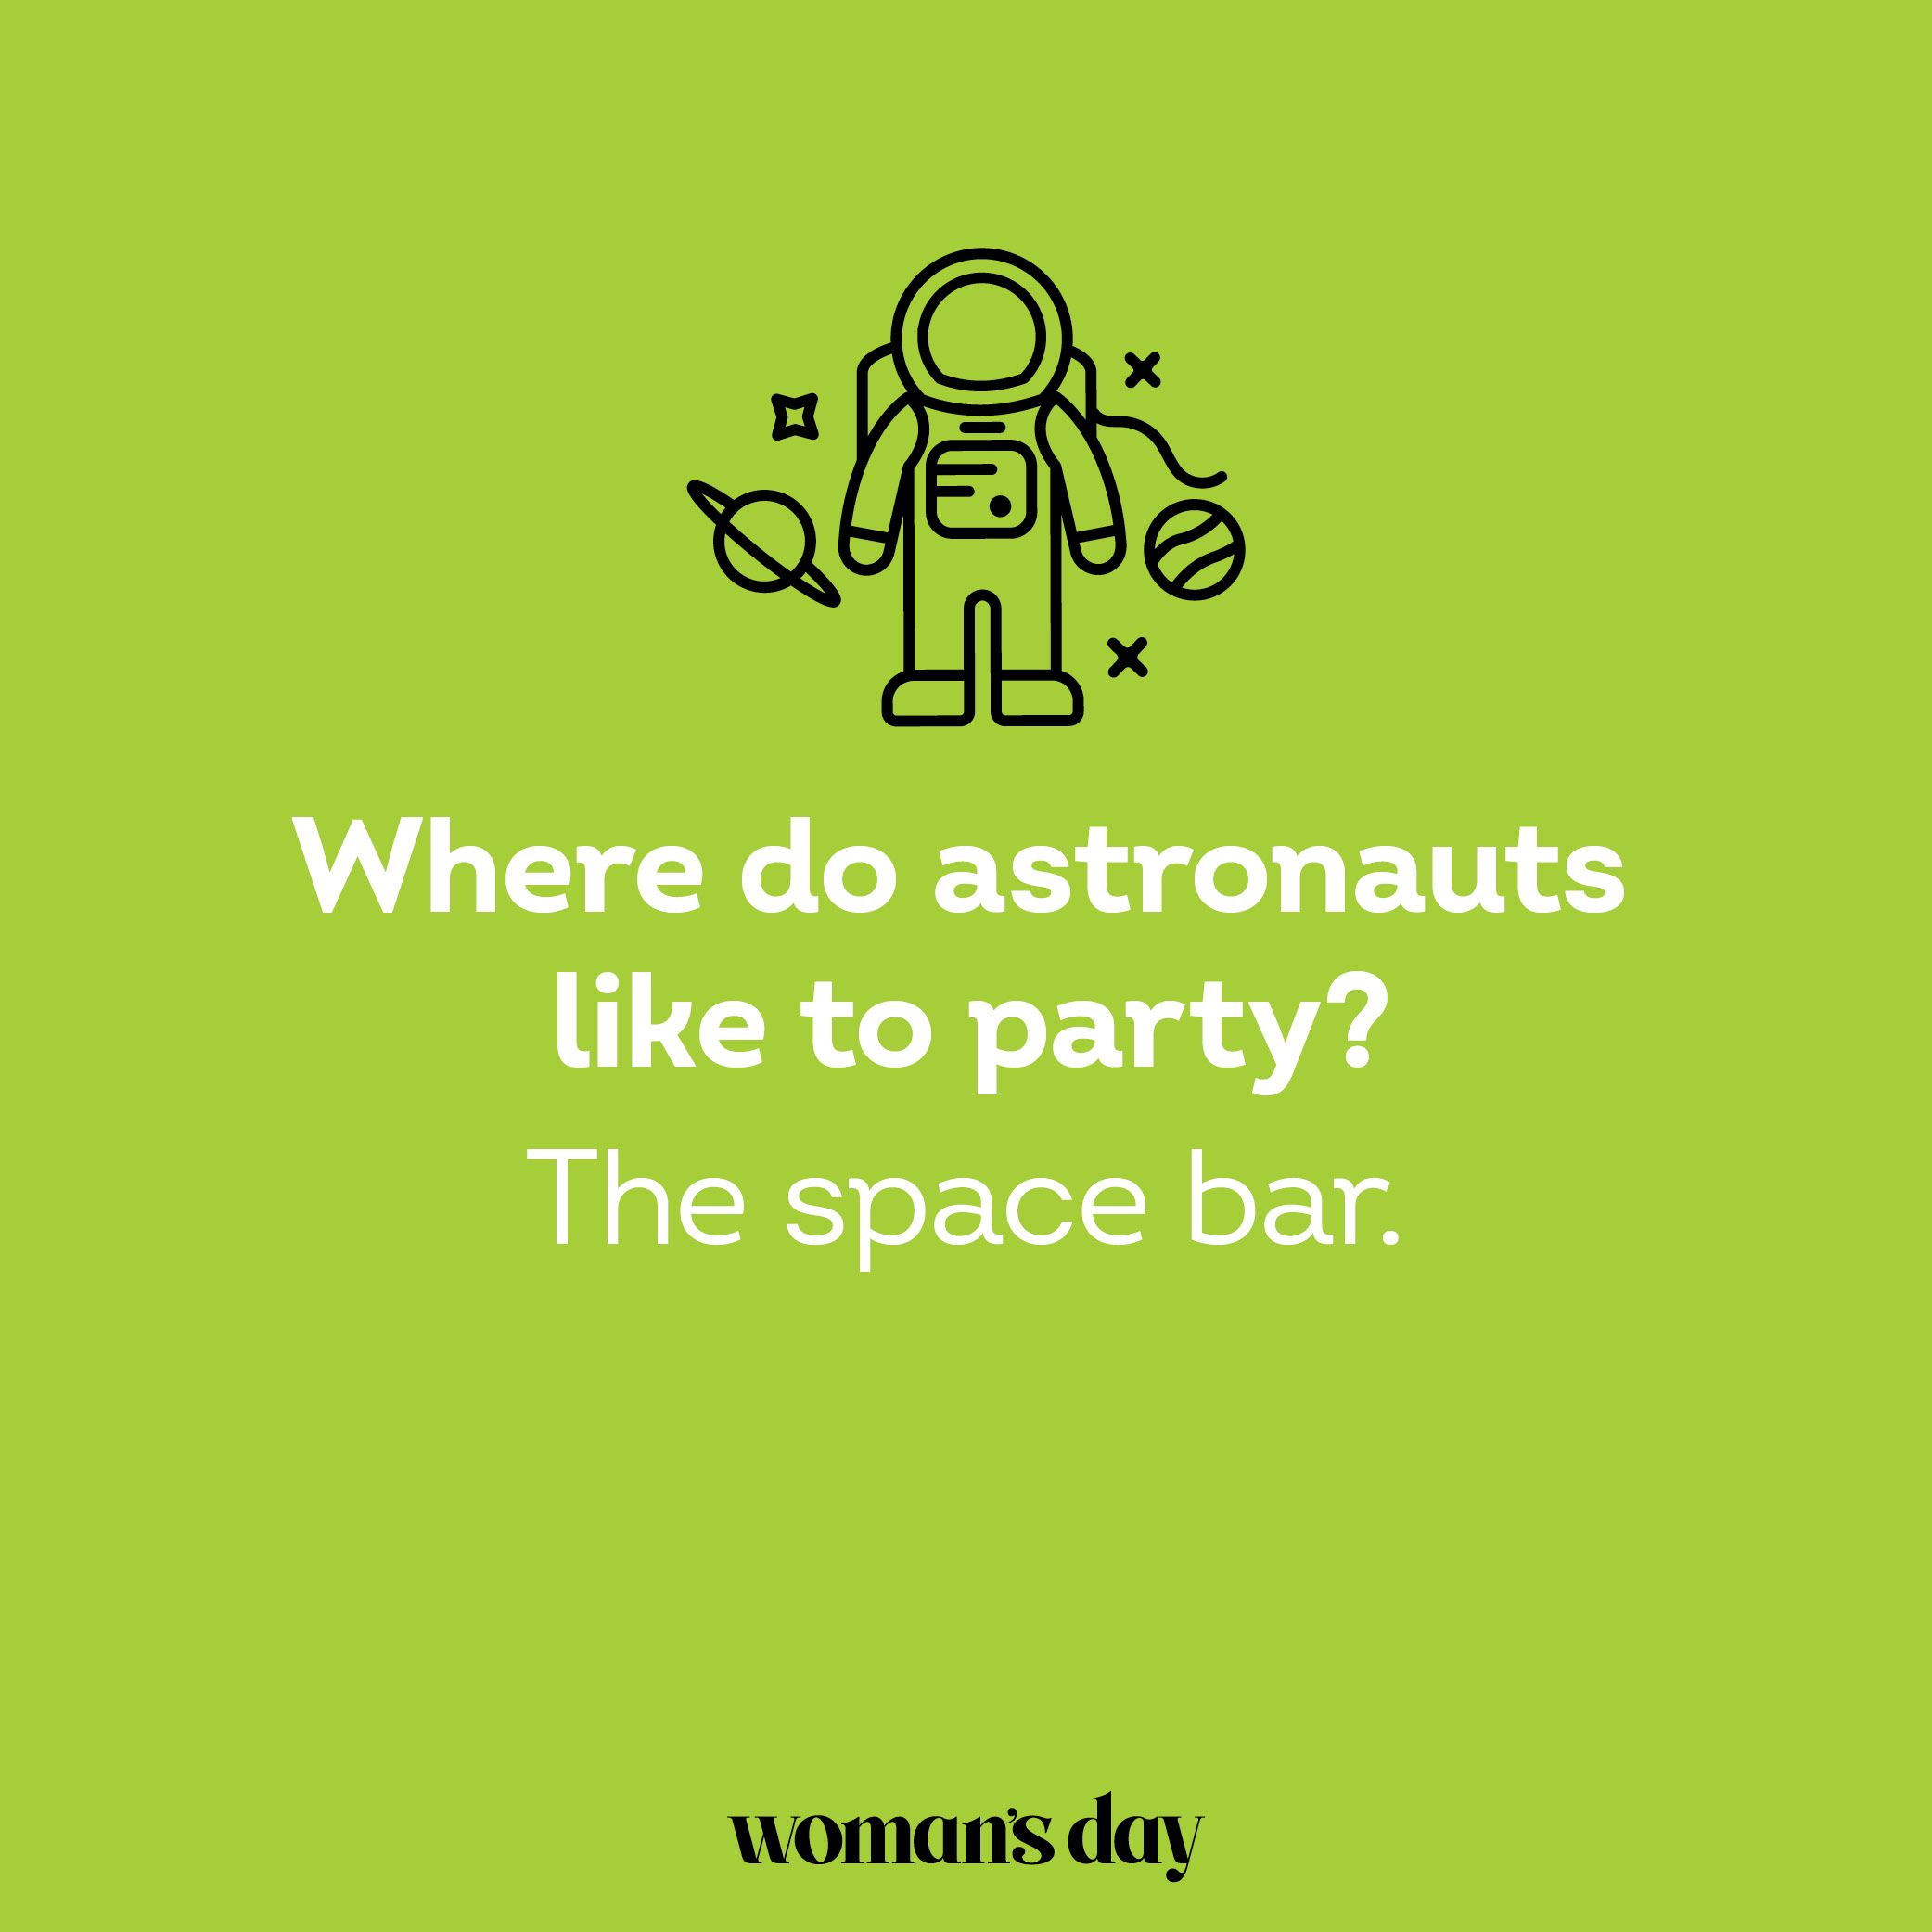 35 Funny Science Jokes - Nerdy Science Puns for Kids and Adults